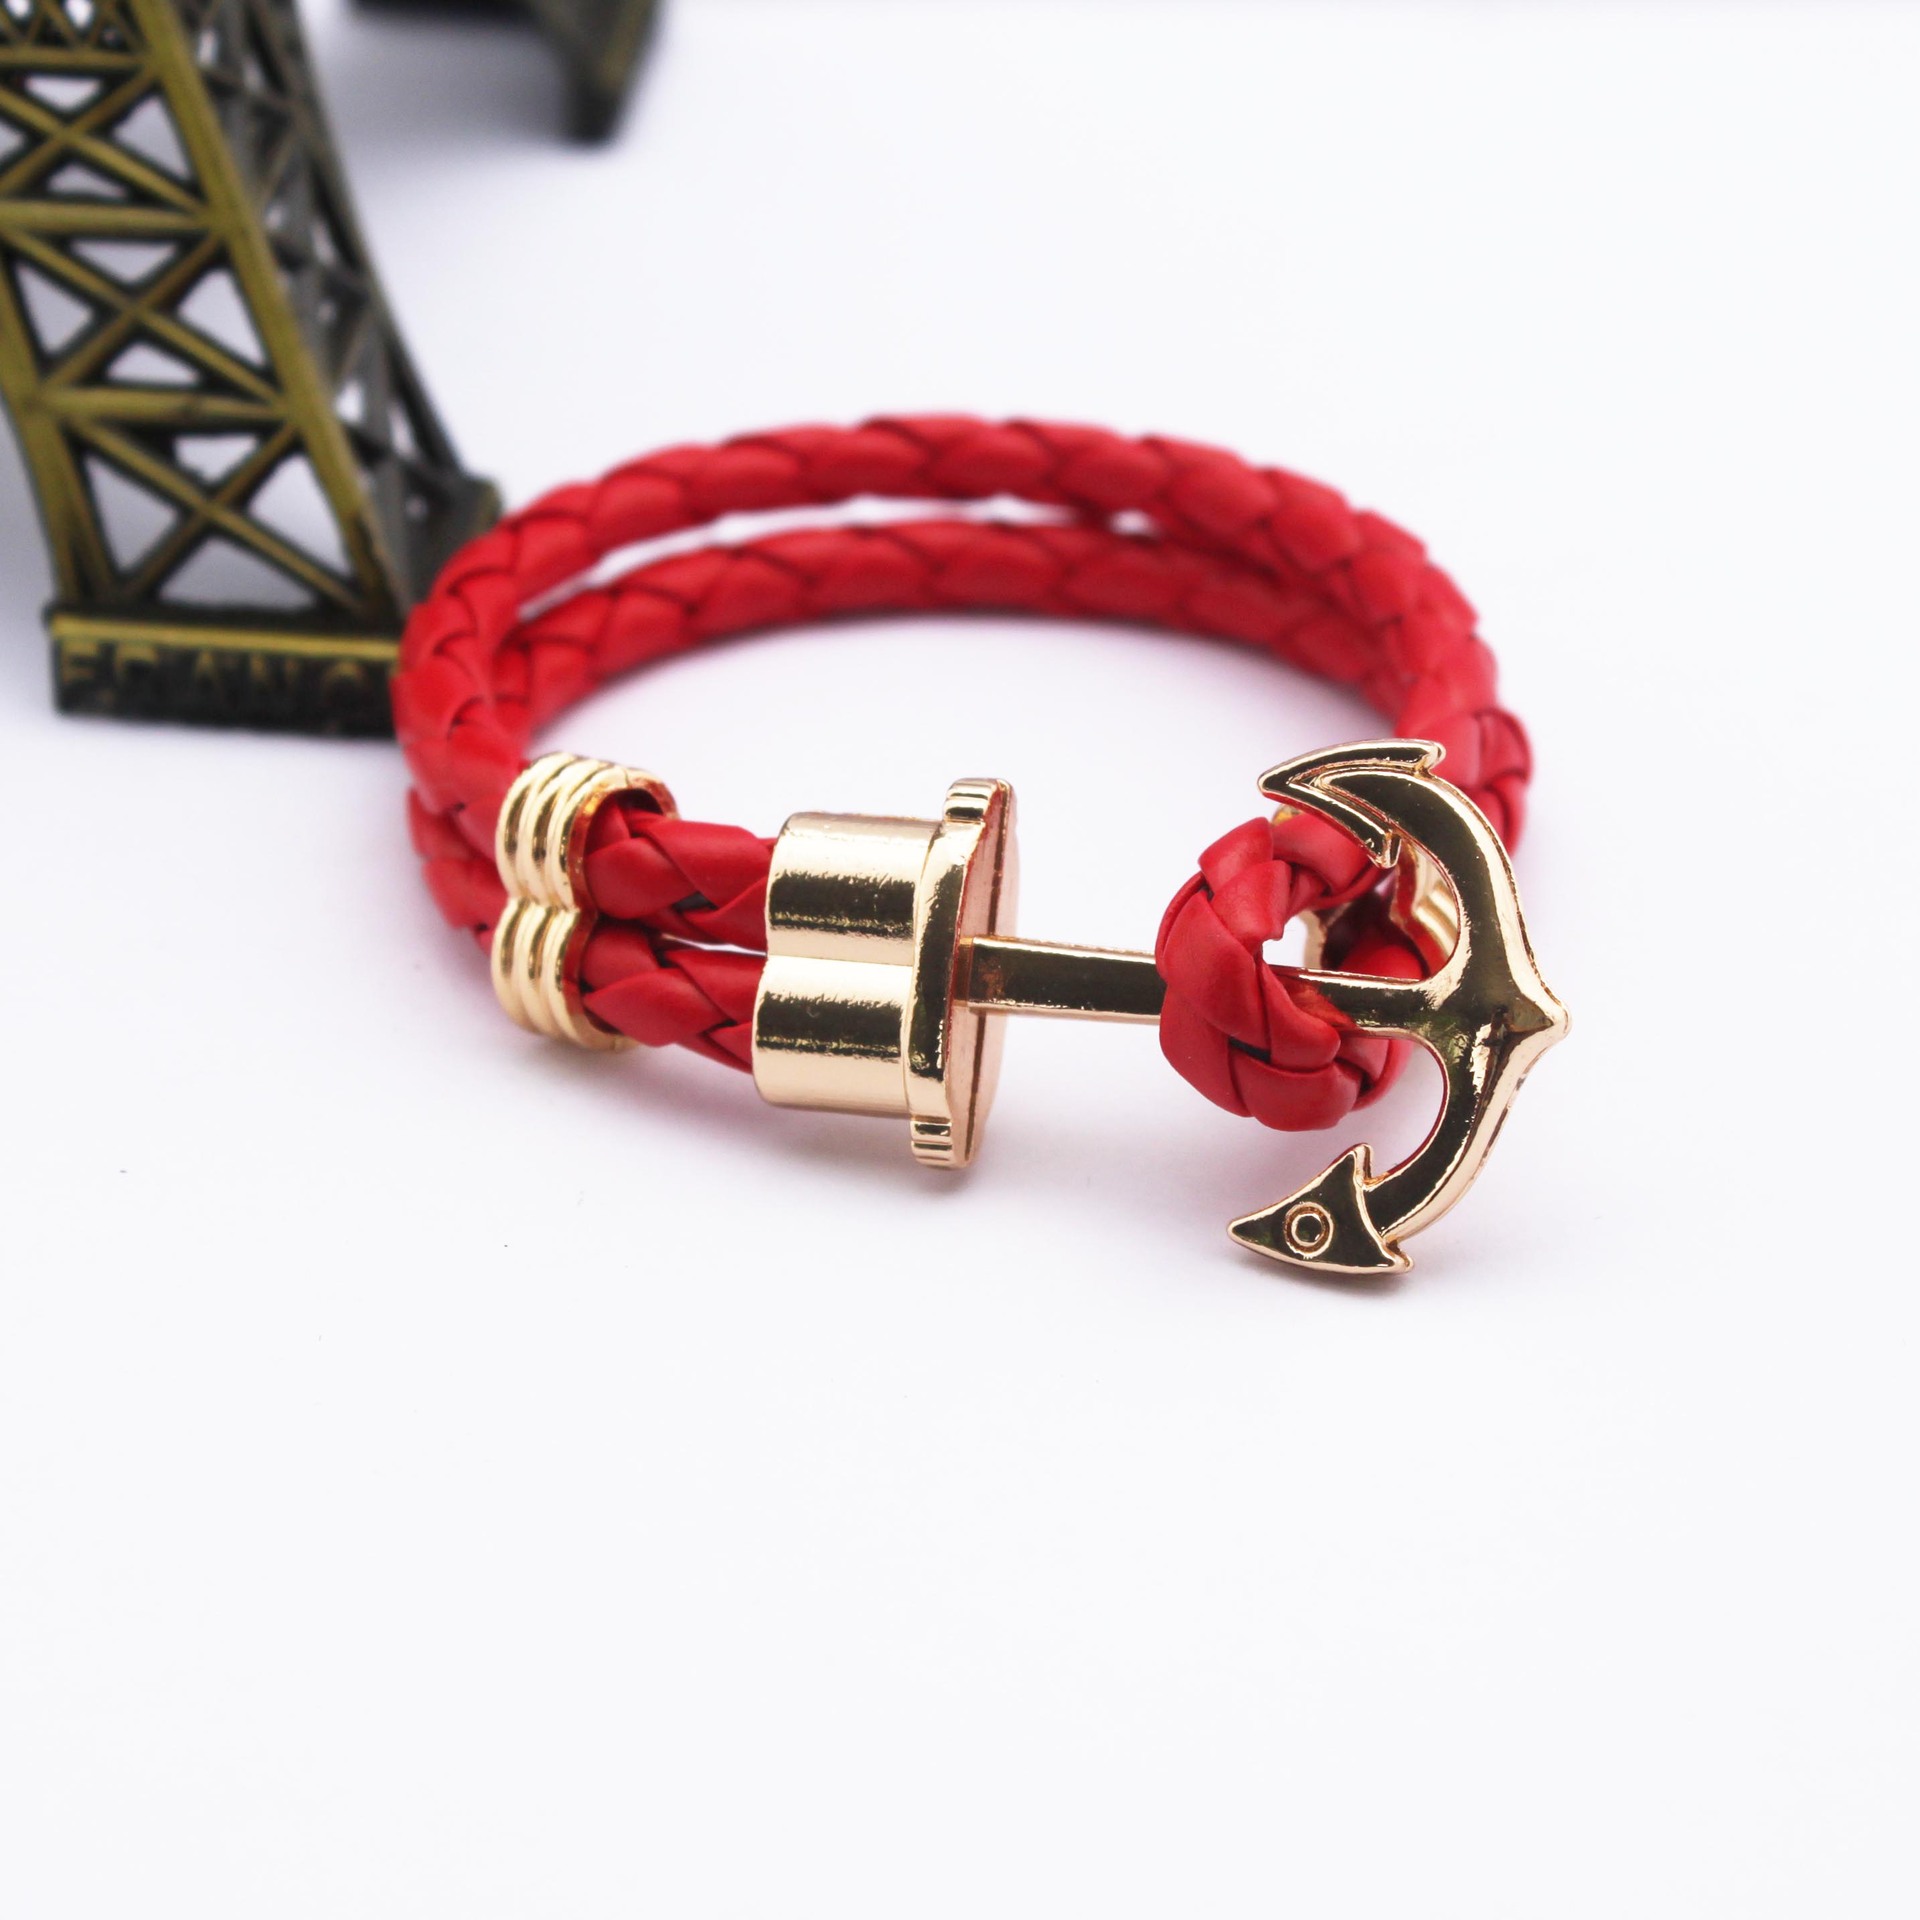 New 2015 Fashion Punk Leather Bracelet Surround Multi layer Woven Rope Leaher Mens Bracelet Jewelry